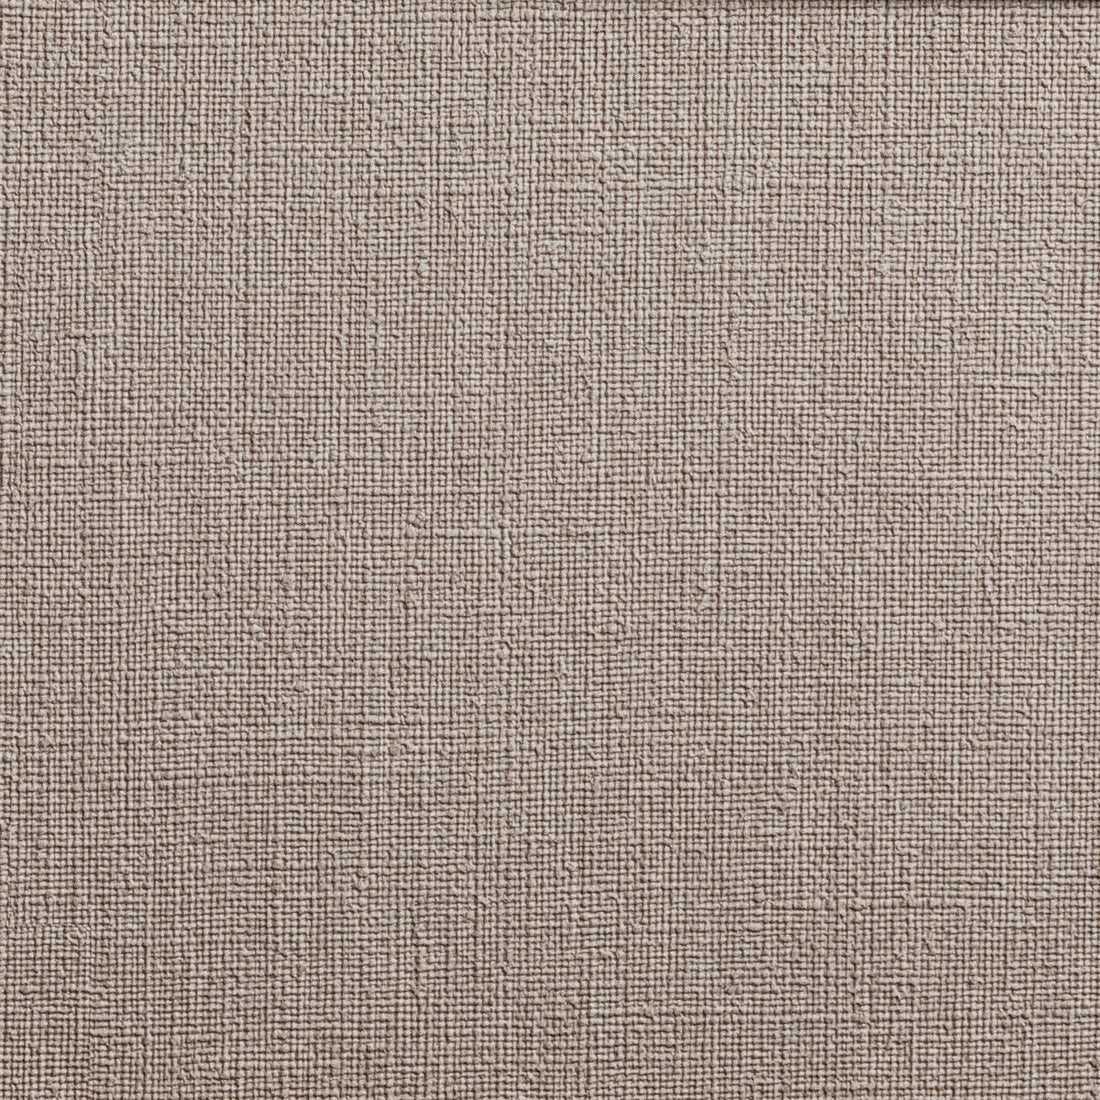 Caslin fabric in fog color - pattern CASLIN.106.0 - by Kravet Contract in the Foundations / Value collection